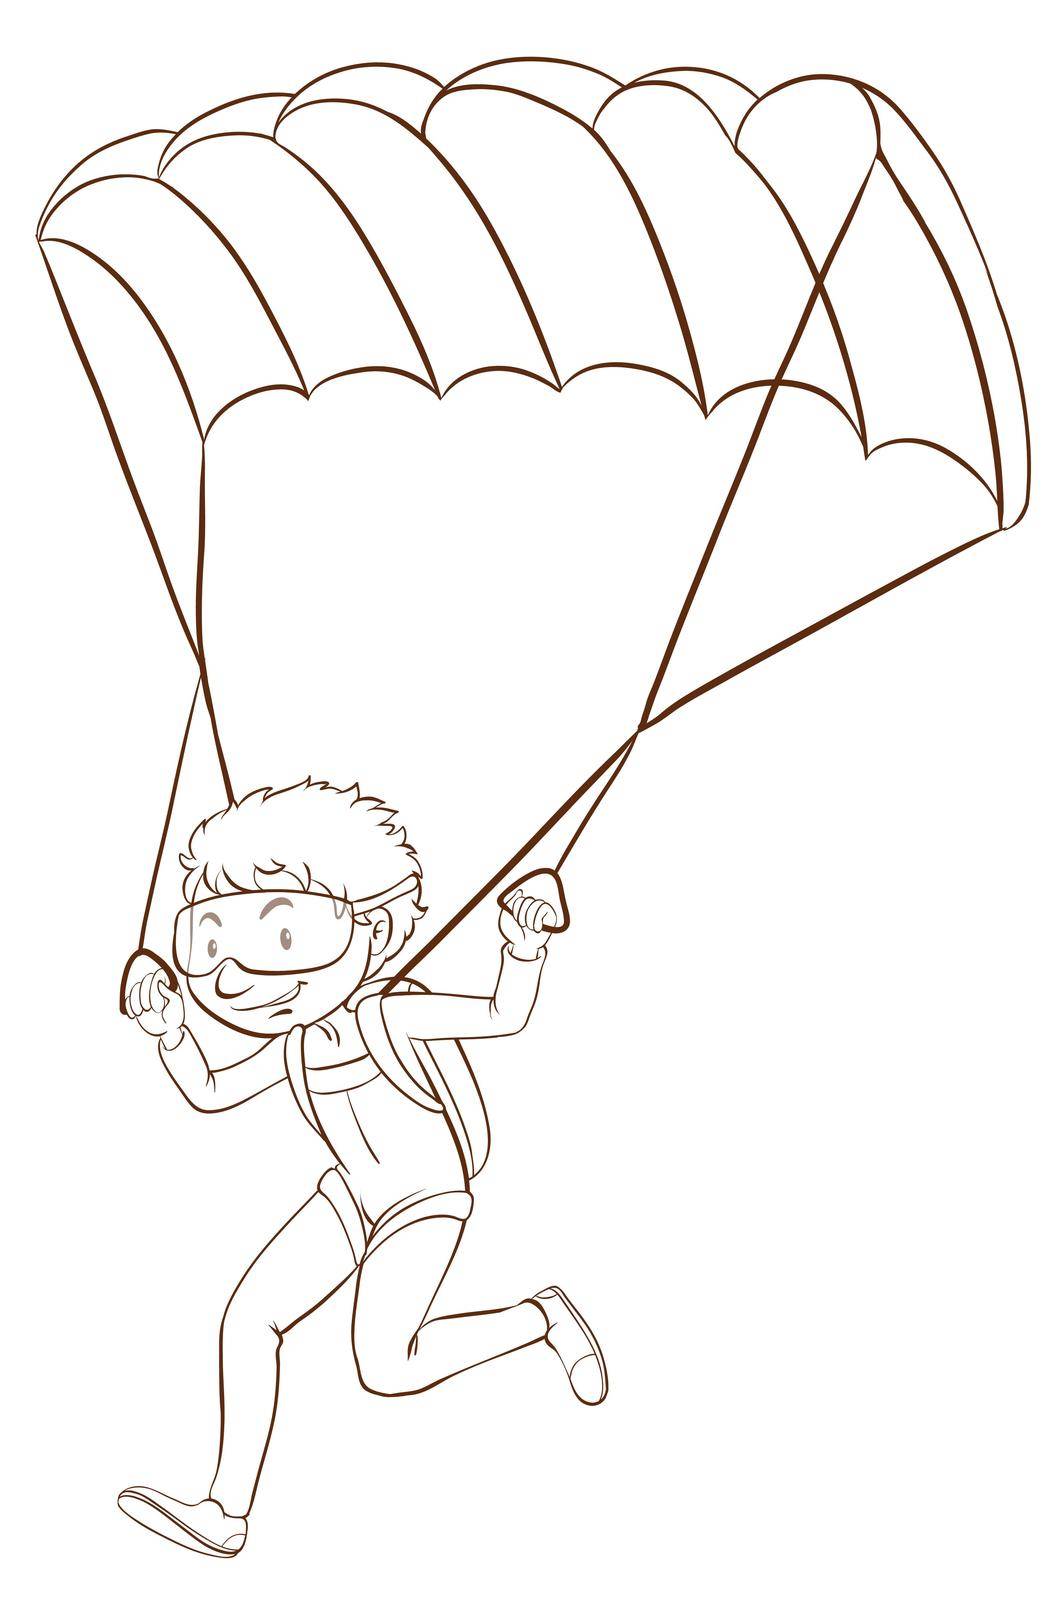 A plain drawing of a boy skydiving on a white background